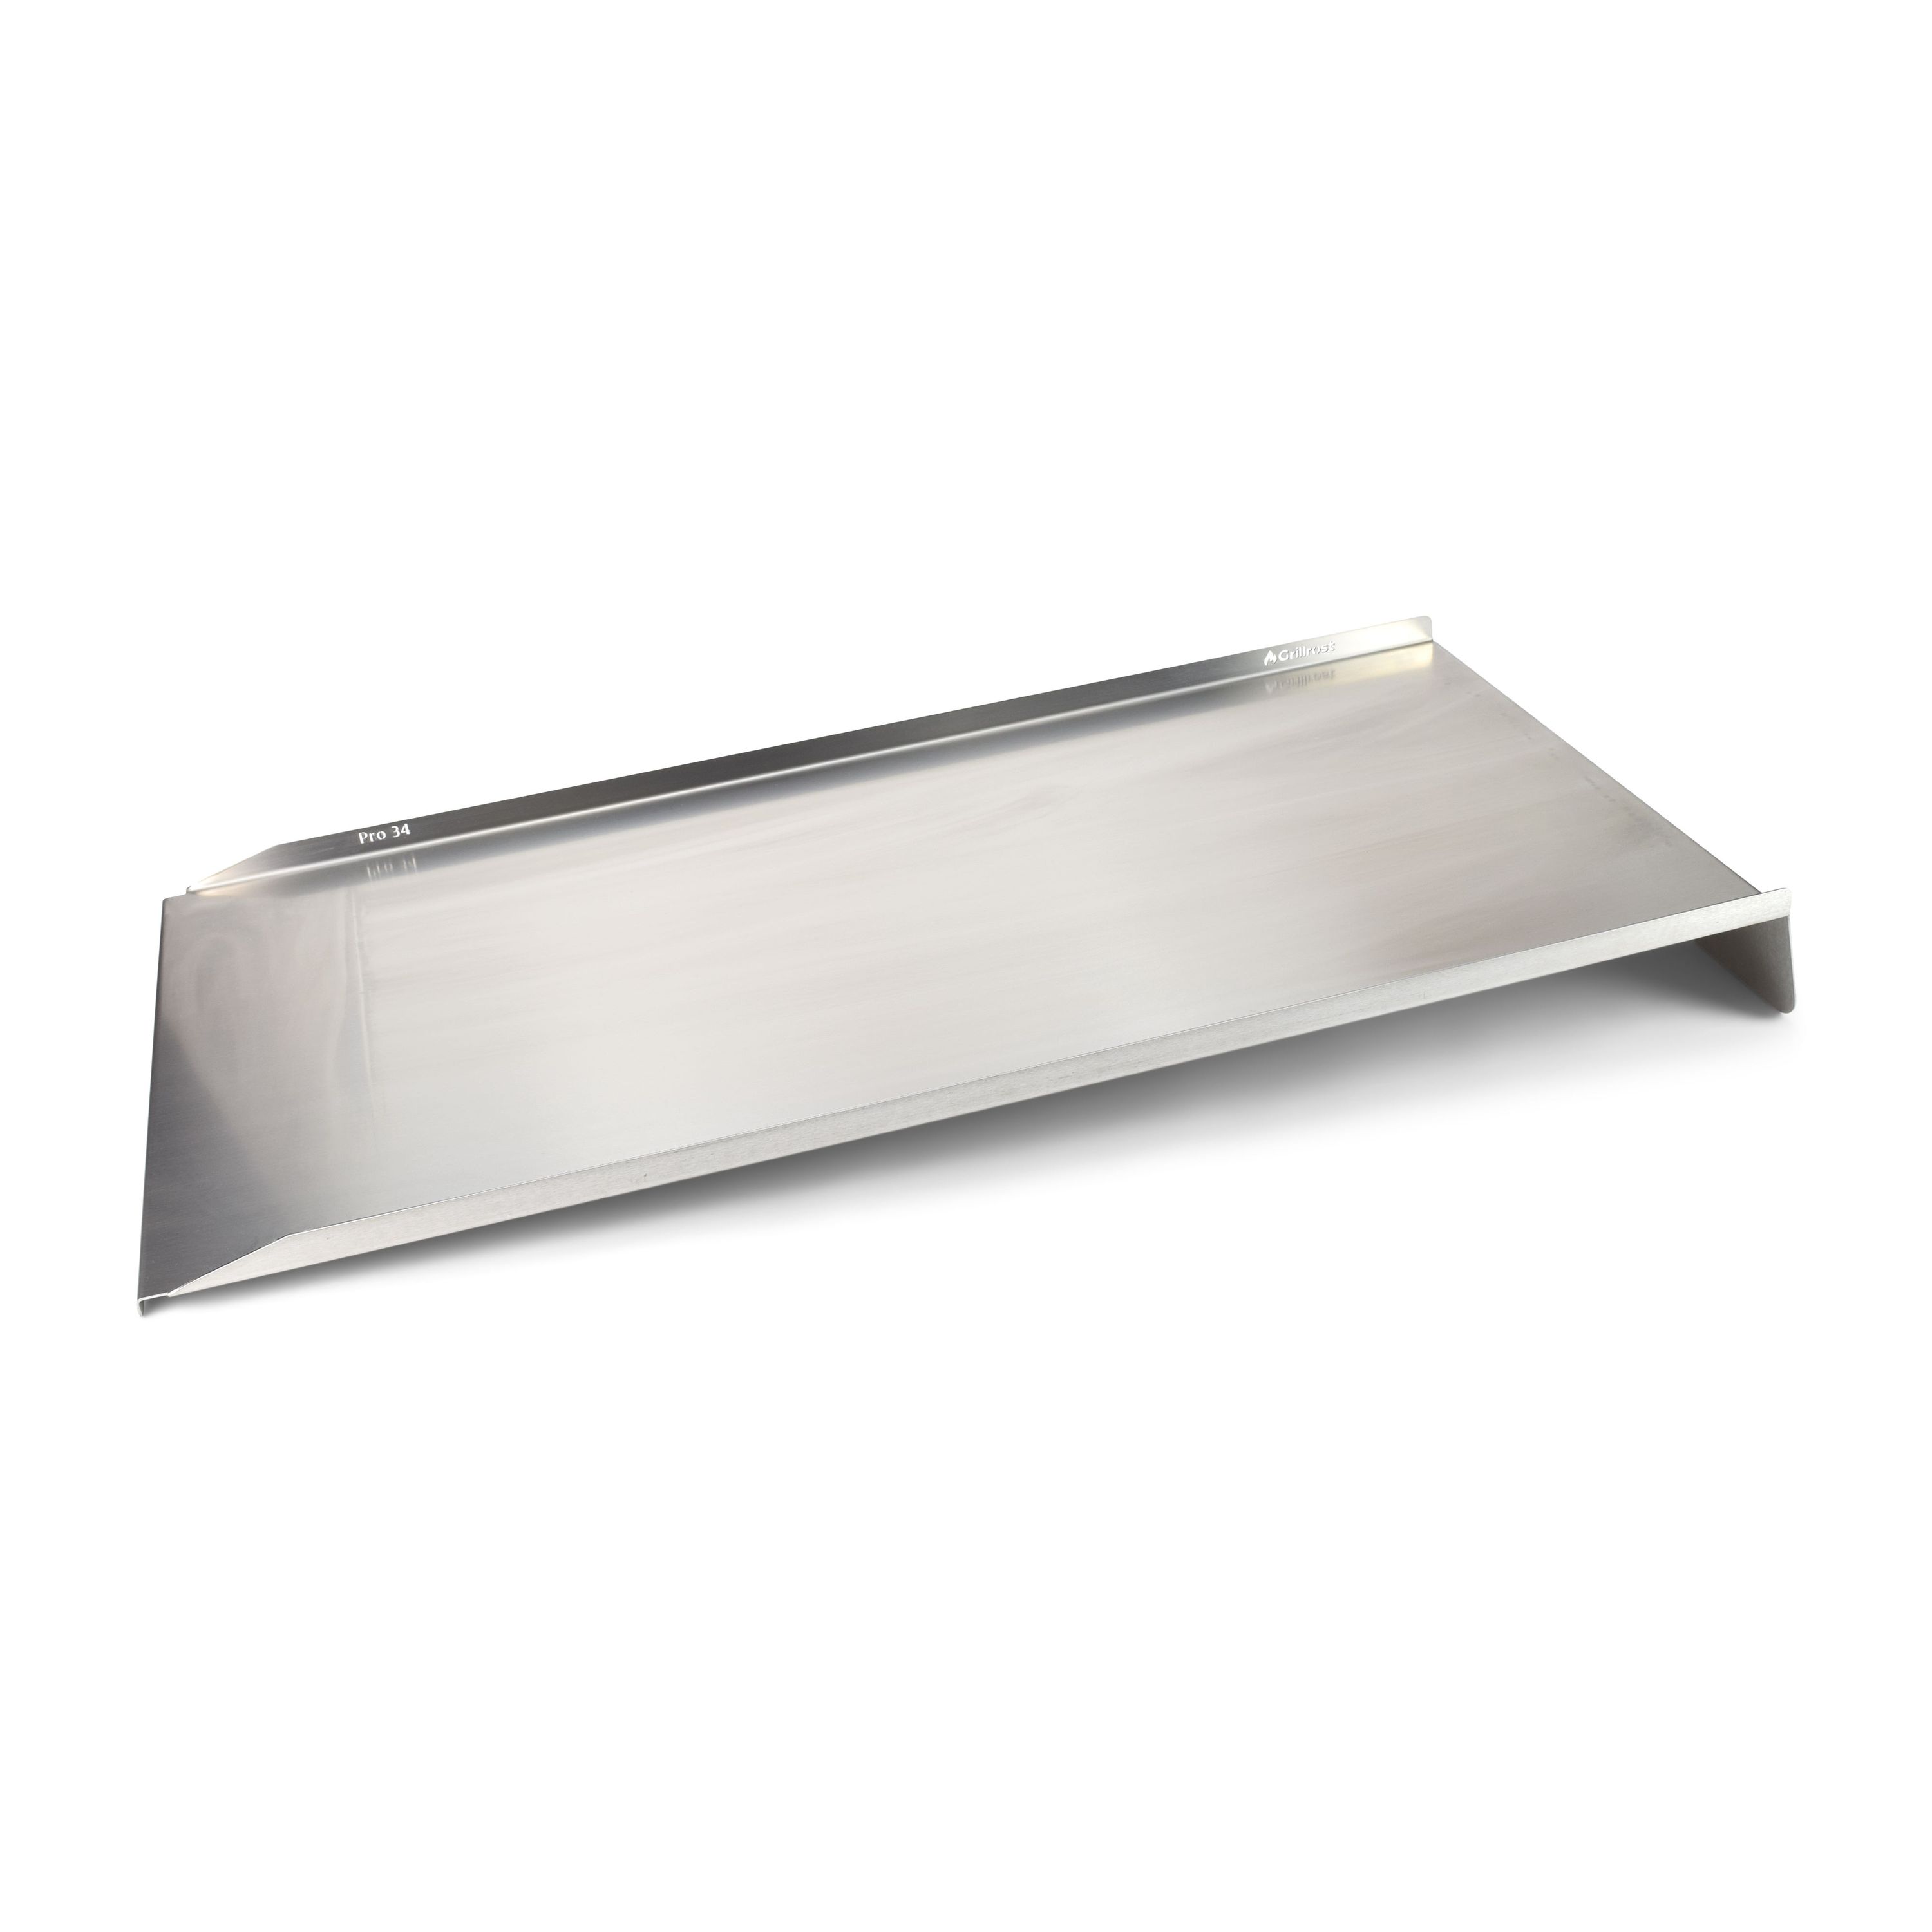 Stainless steel grease drain plate for carrier Pro Series 34